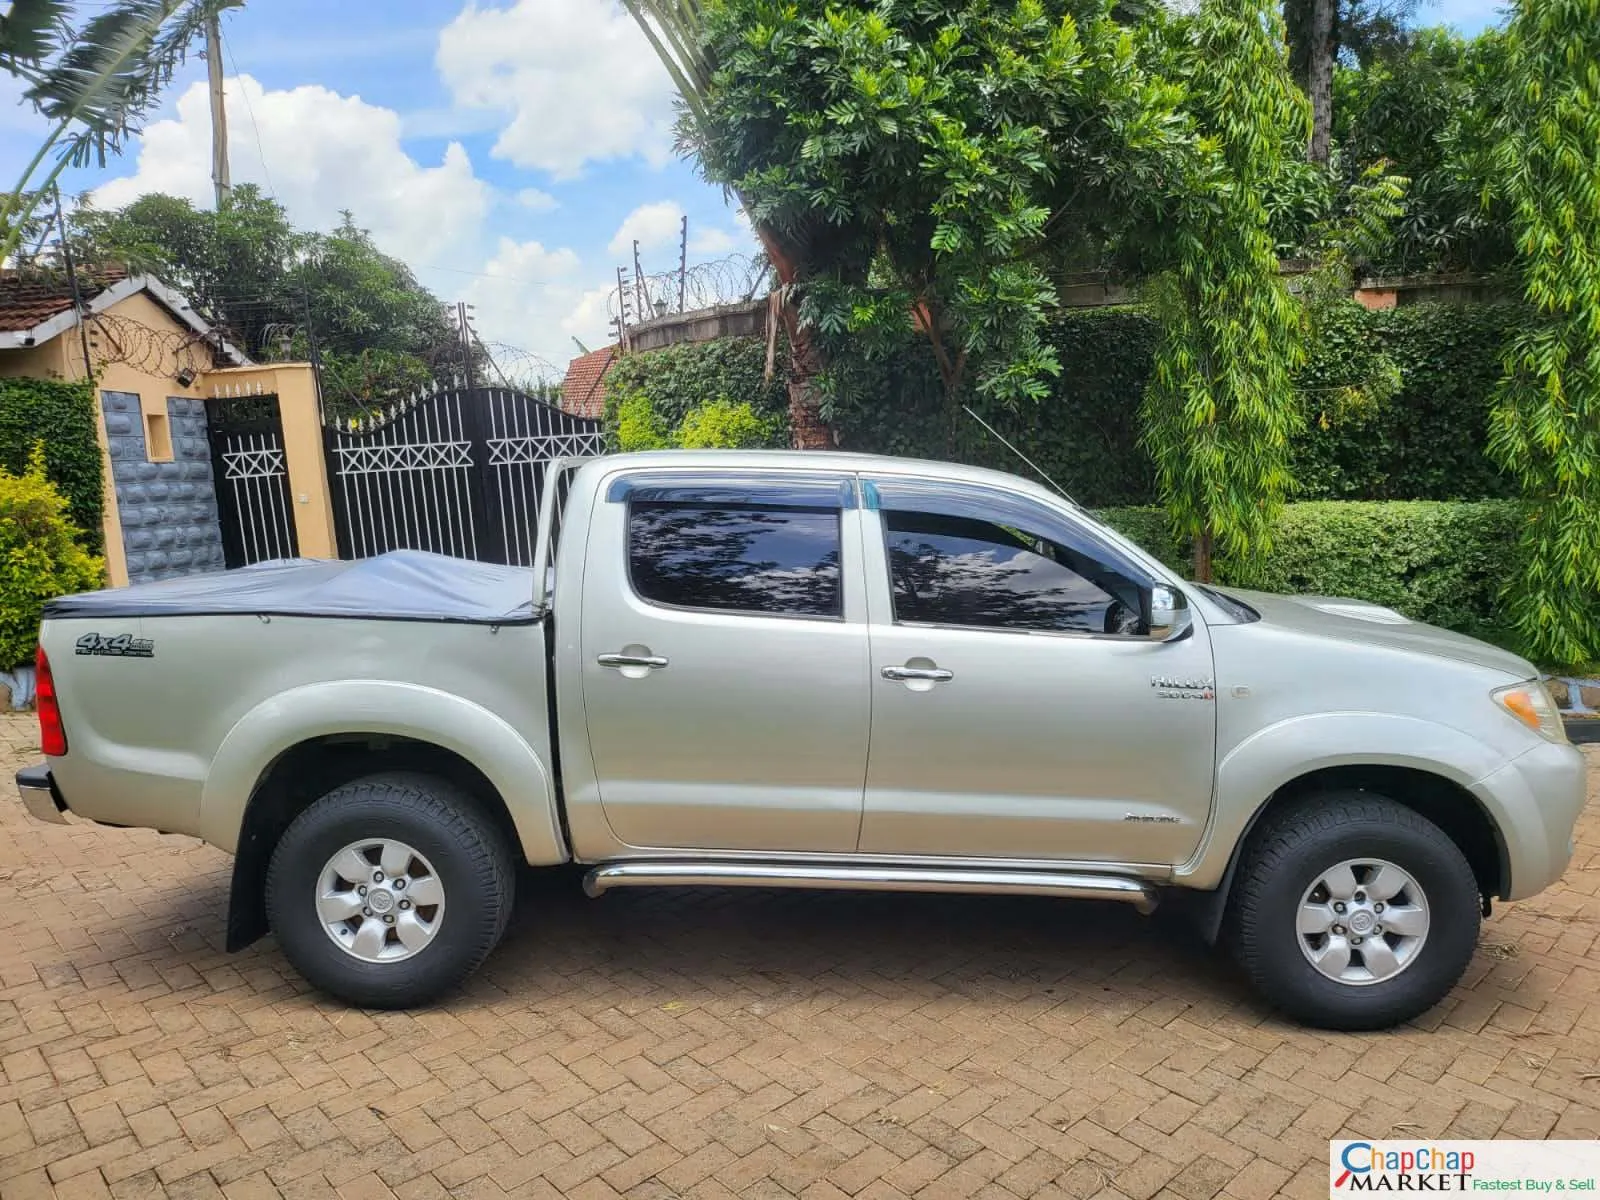 Cars Cars For Sale-Toyota Hilux Auto Double cab QUICK SALE You Pay 30% Deposit trade in OK Hire purchase installments manual 9